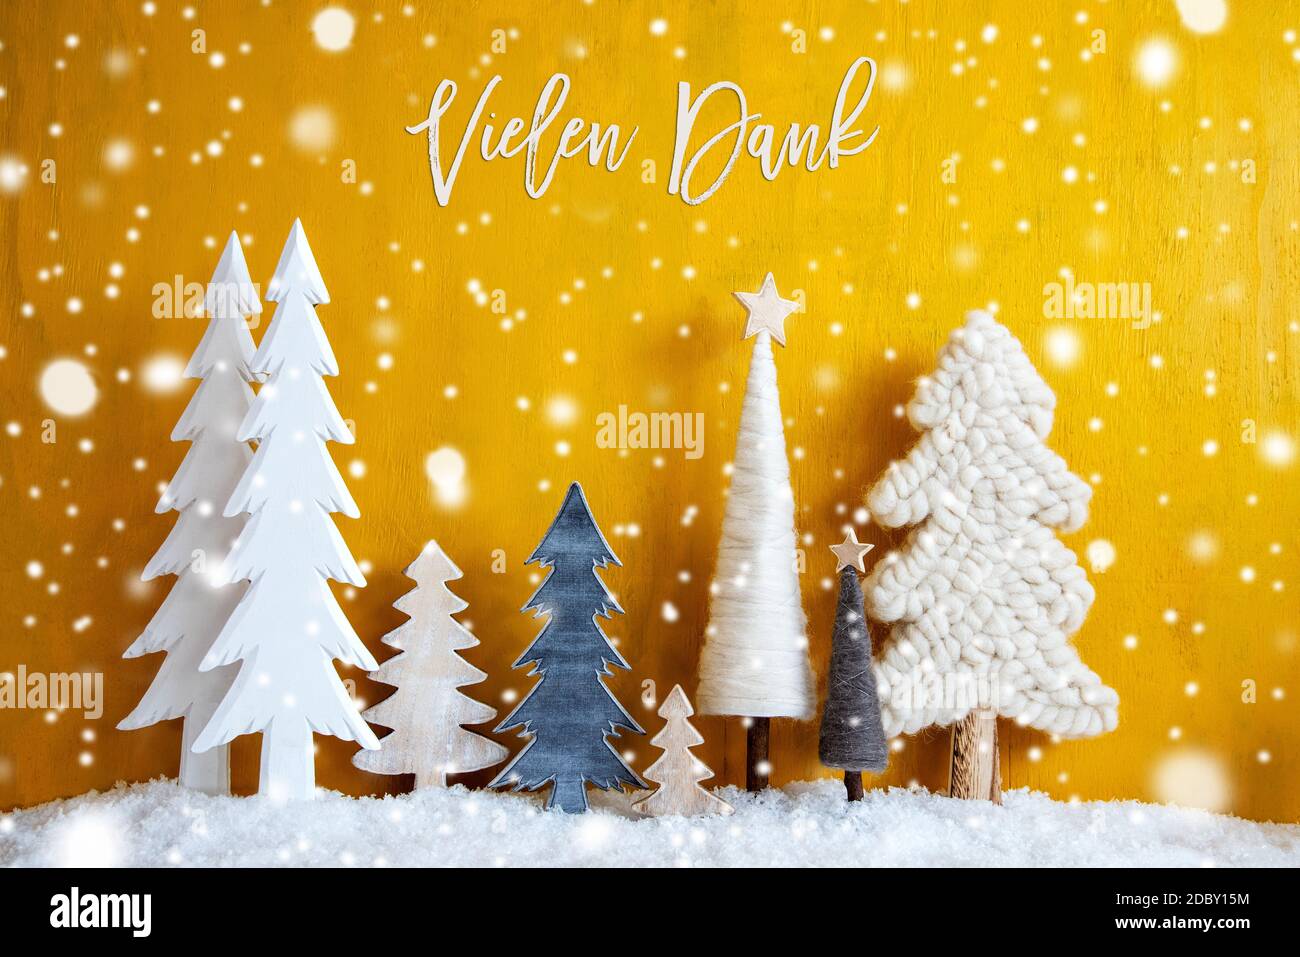 Christmas Trees With German Calligraphy Vielen Dank Means Thank You. Yellow Wooden Rustic Background With Snow And Snowflakes. Christmas Decoration Wi Stock Photo